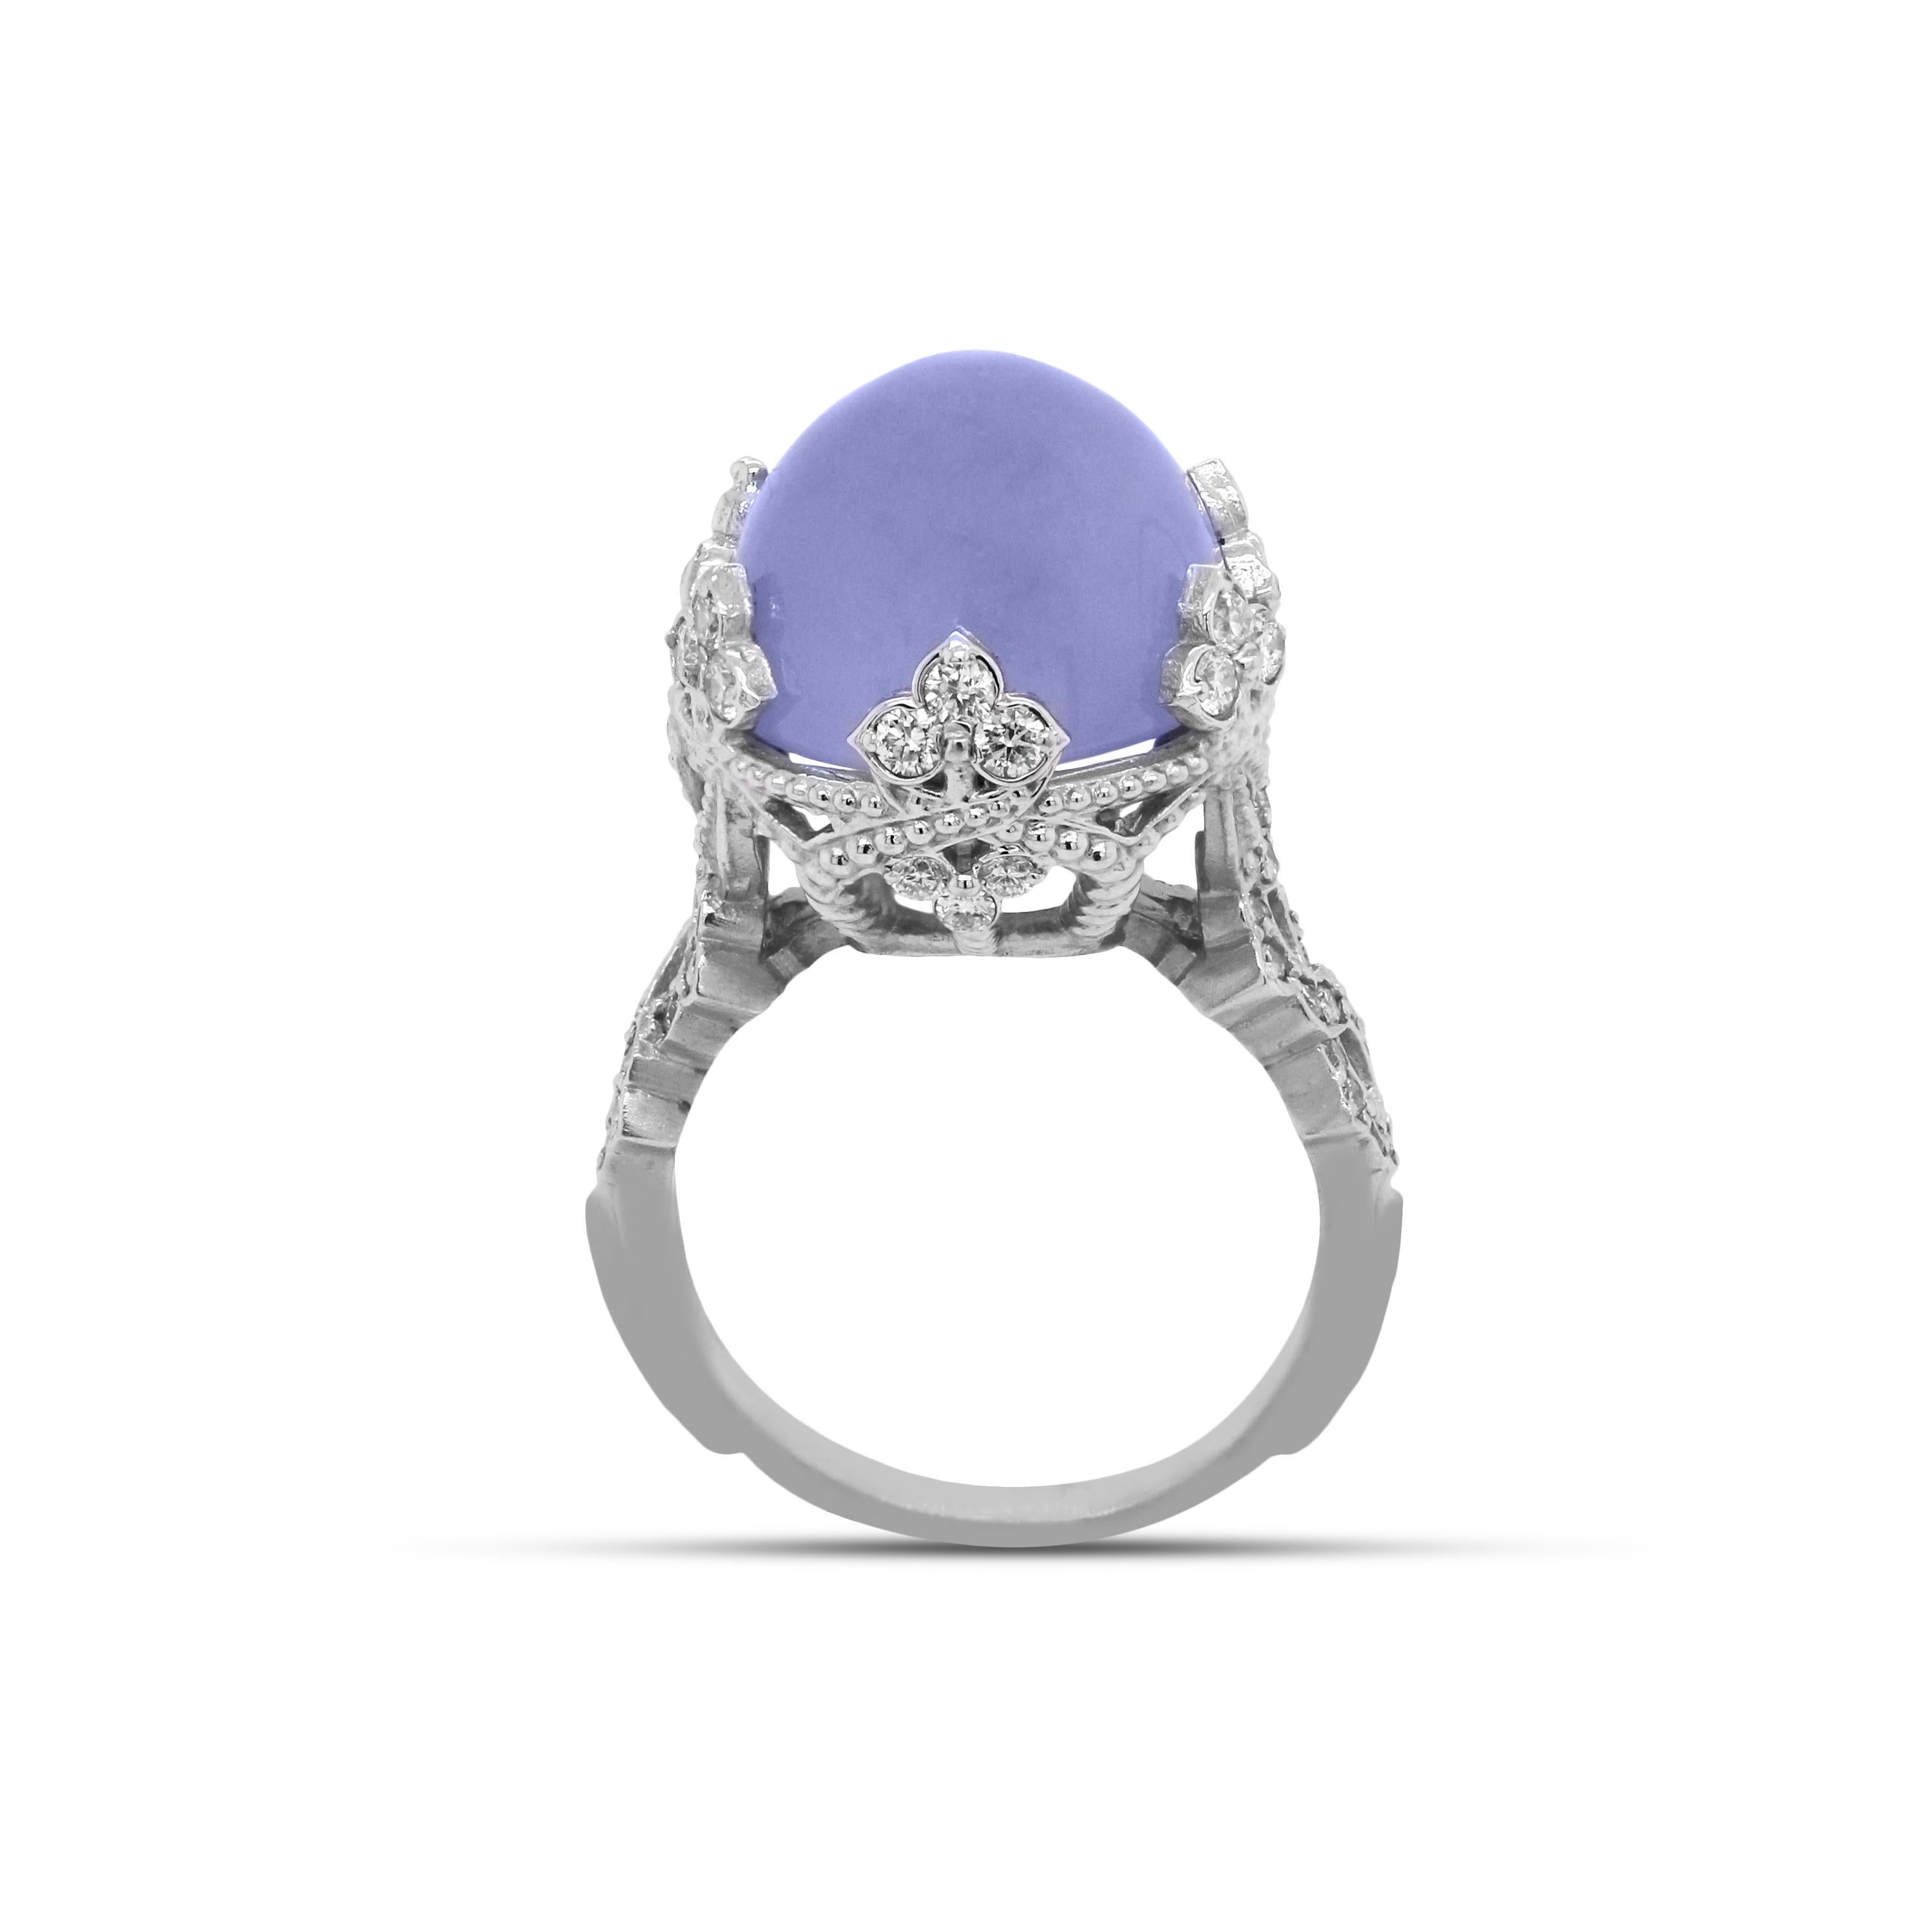 18K White Gold and Diamond Cocktail Ring with Blue Chalcedony center by Stambolian

A unique and everyday ring with all things curve and symmetry. The center Chalcedony is so vibrant in color and goes beautifully with the white gold. (This ring is